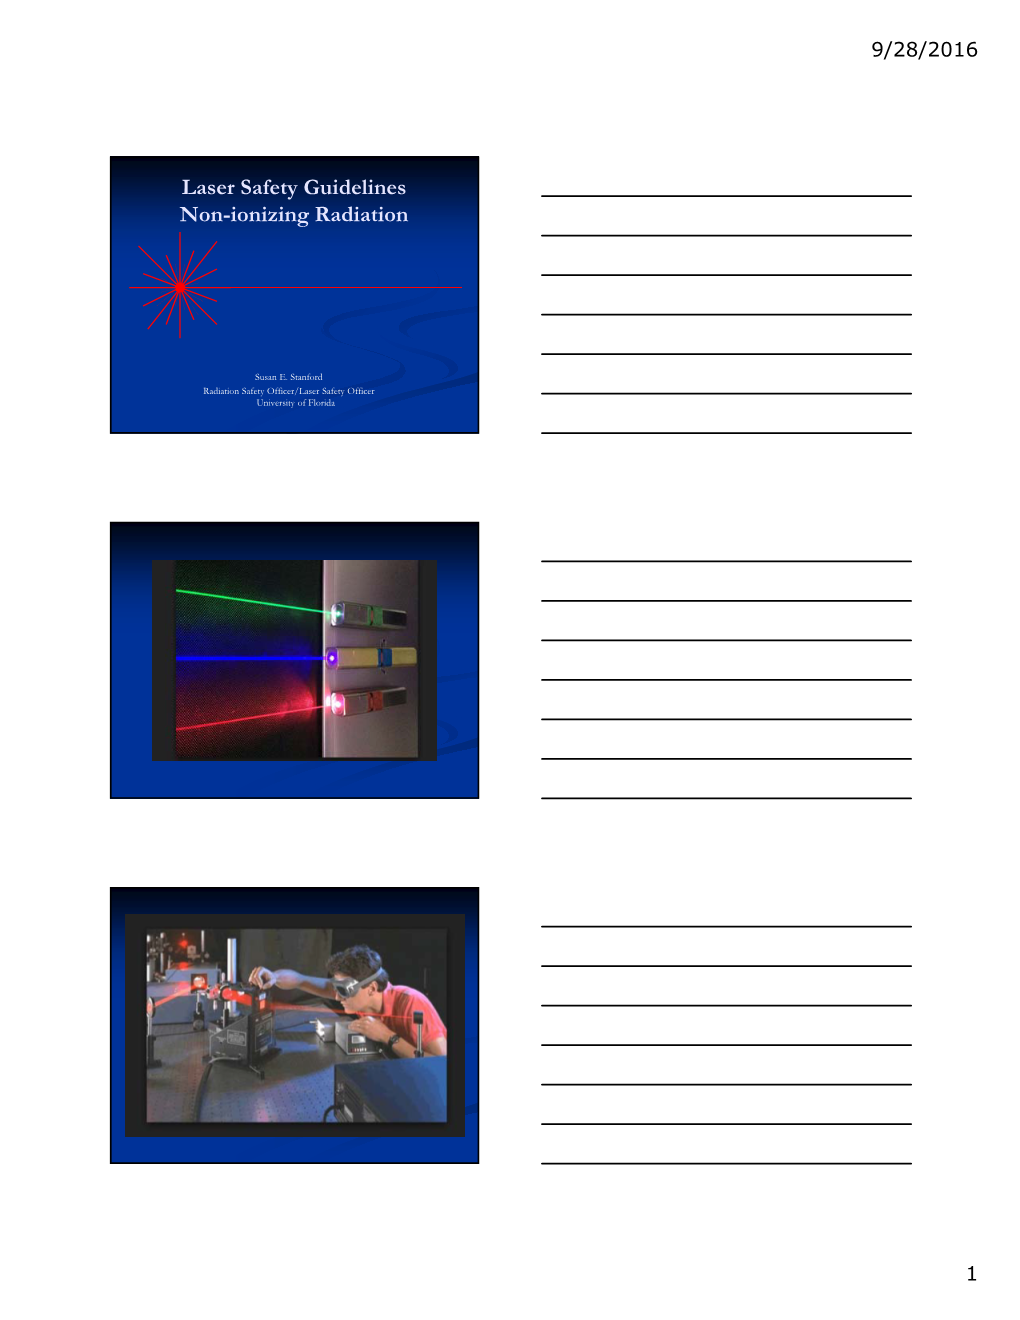 Laser Safety Guidelines Non-Ionizing Radiation